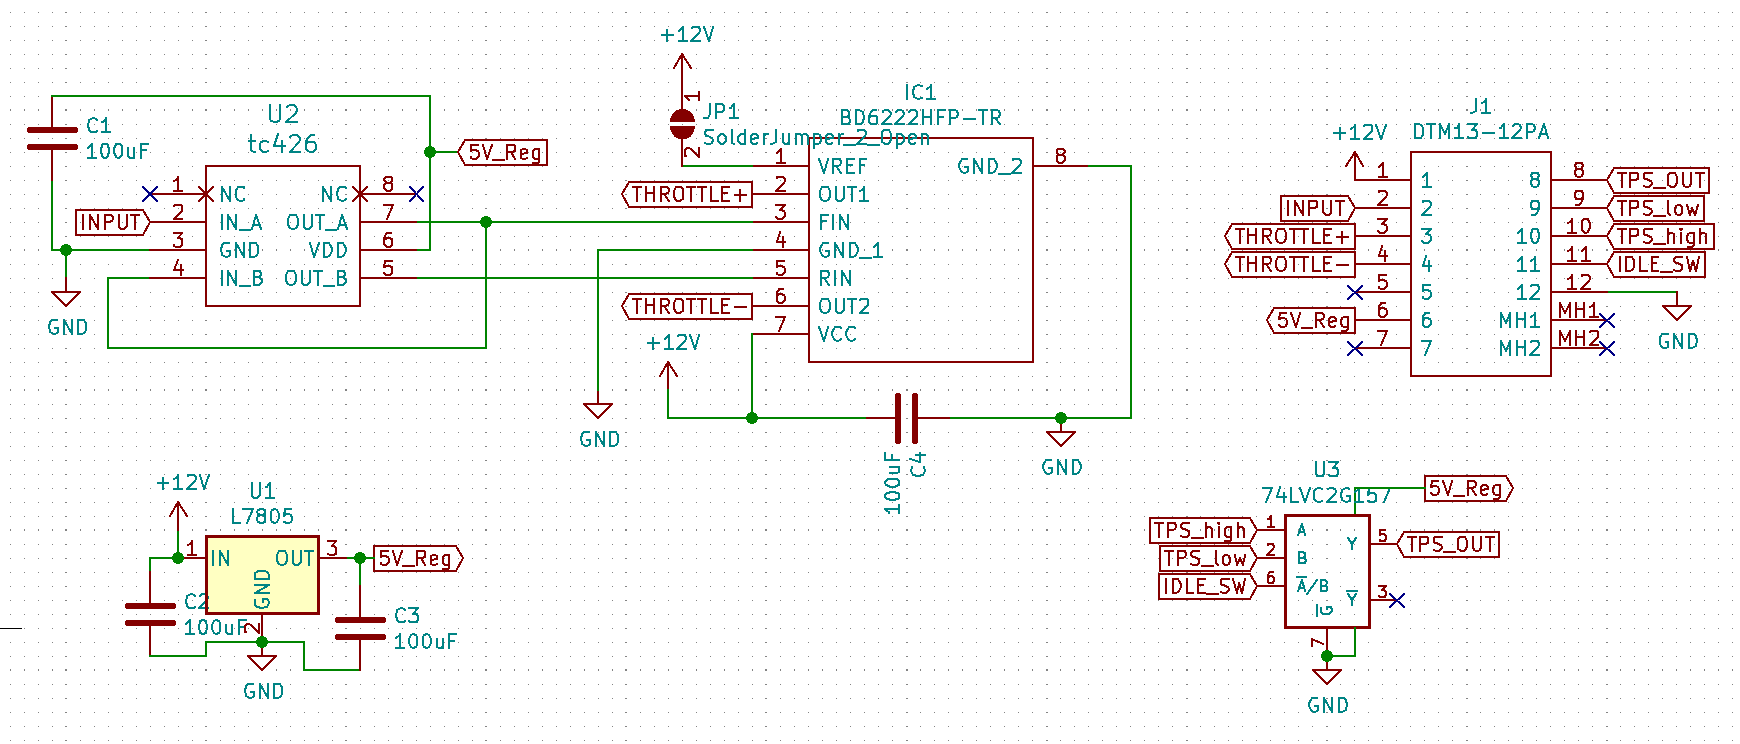 vw68_obd2_idle_control_addon_prototype_sch.png